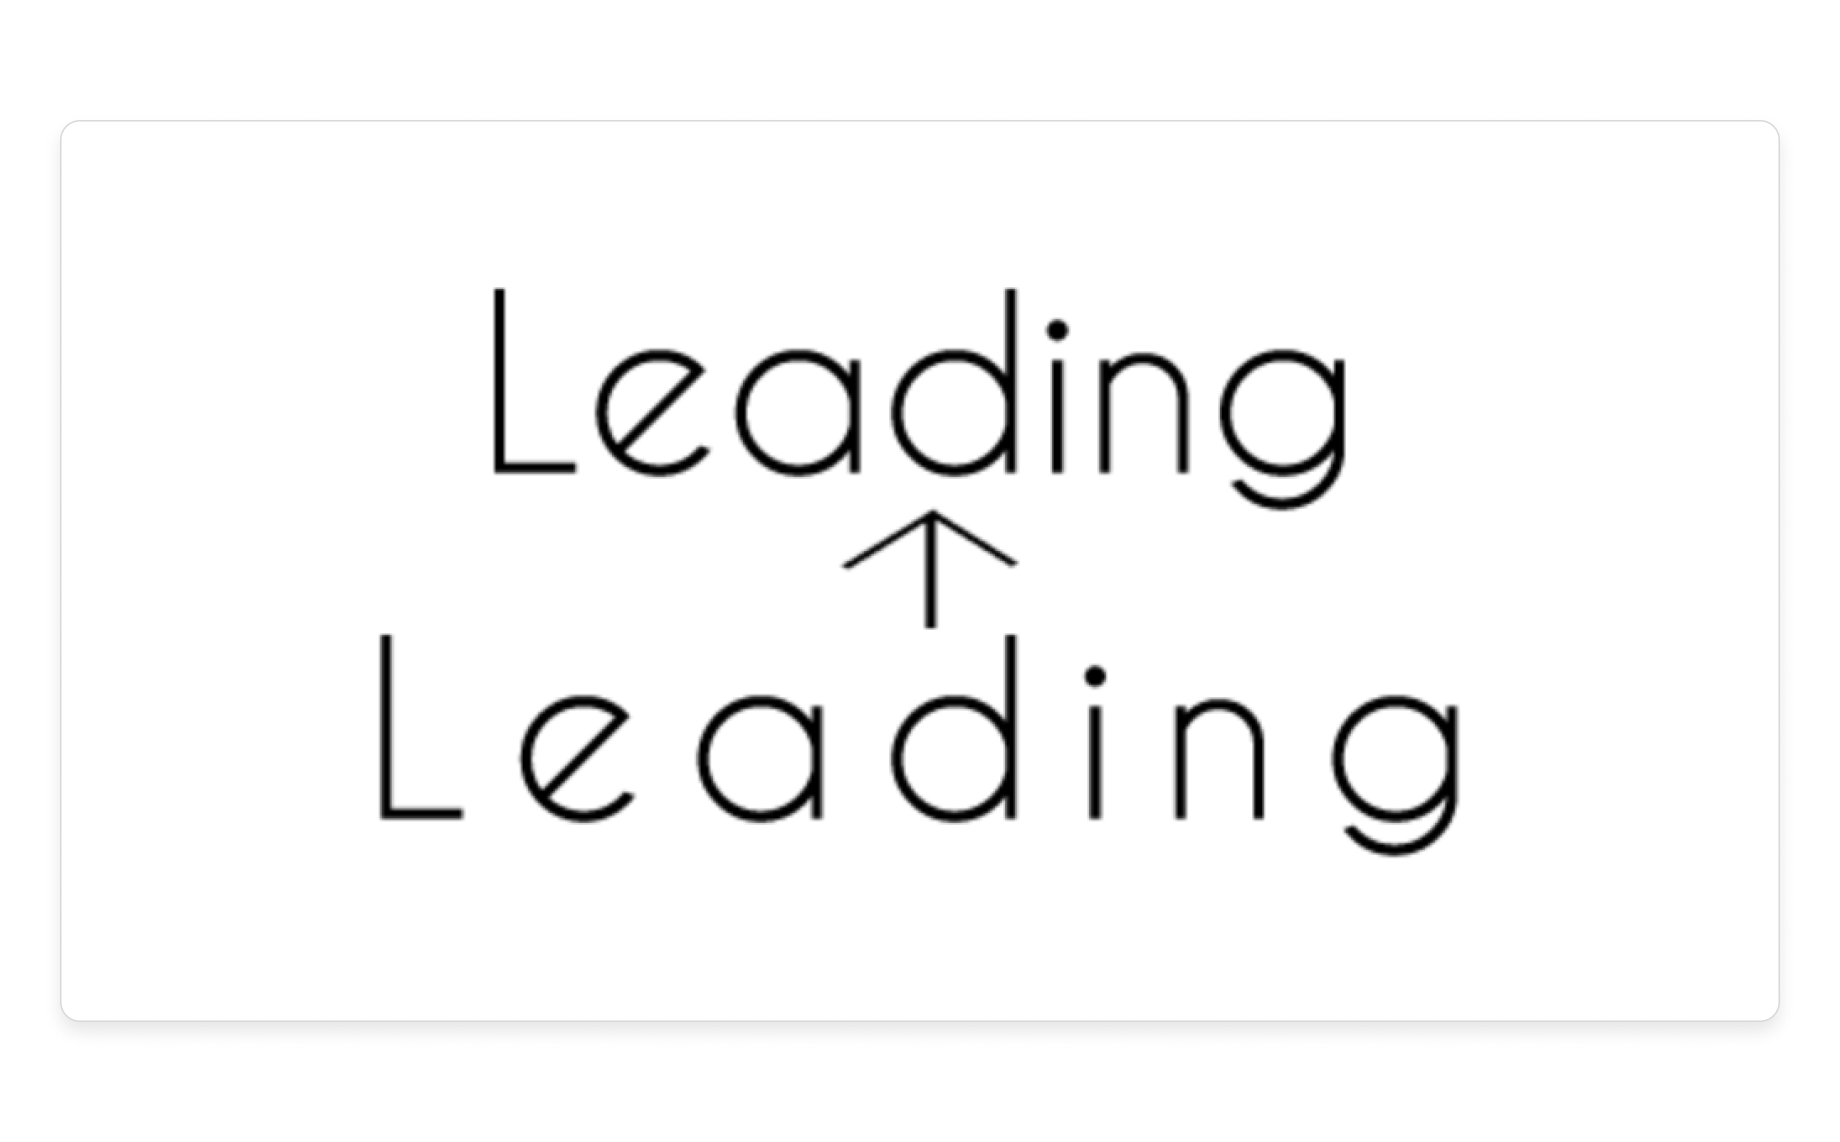 Leading (or line spacing) in typography